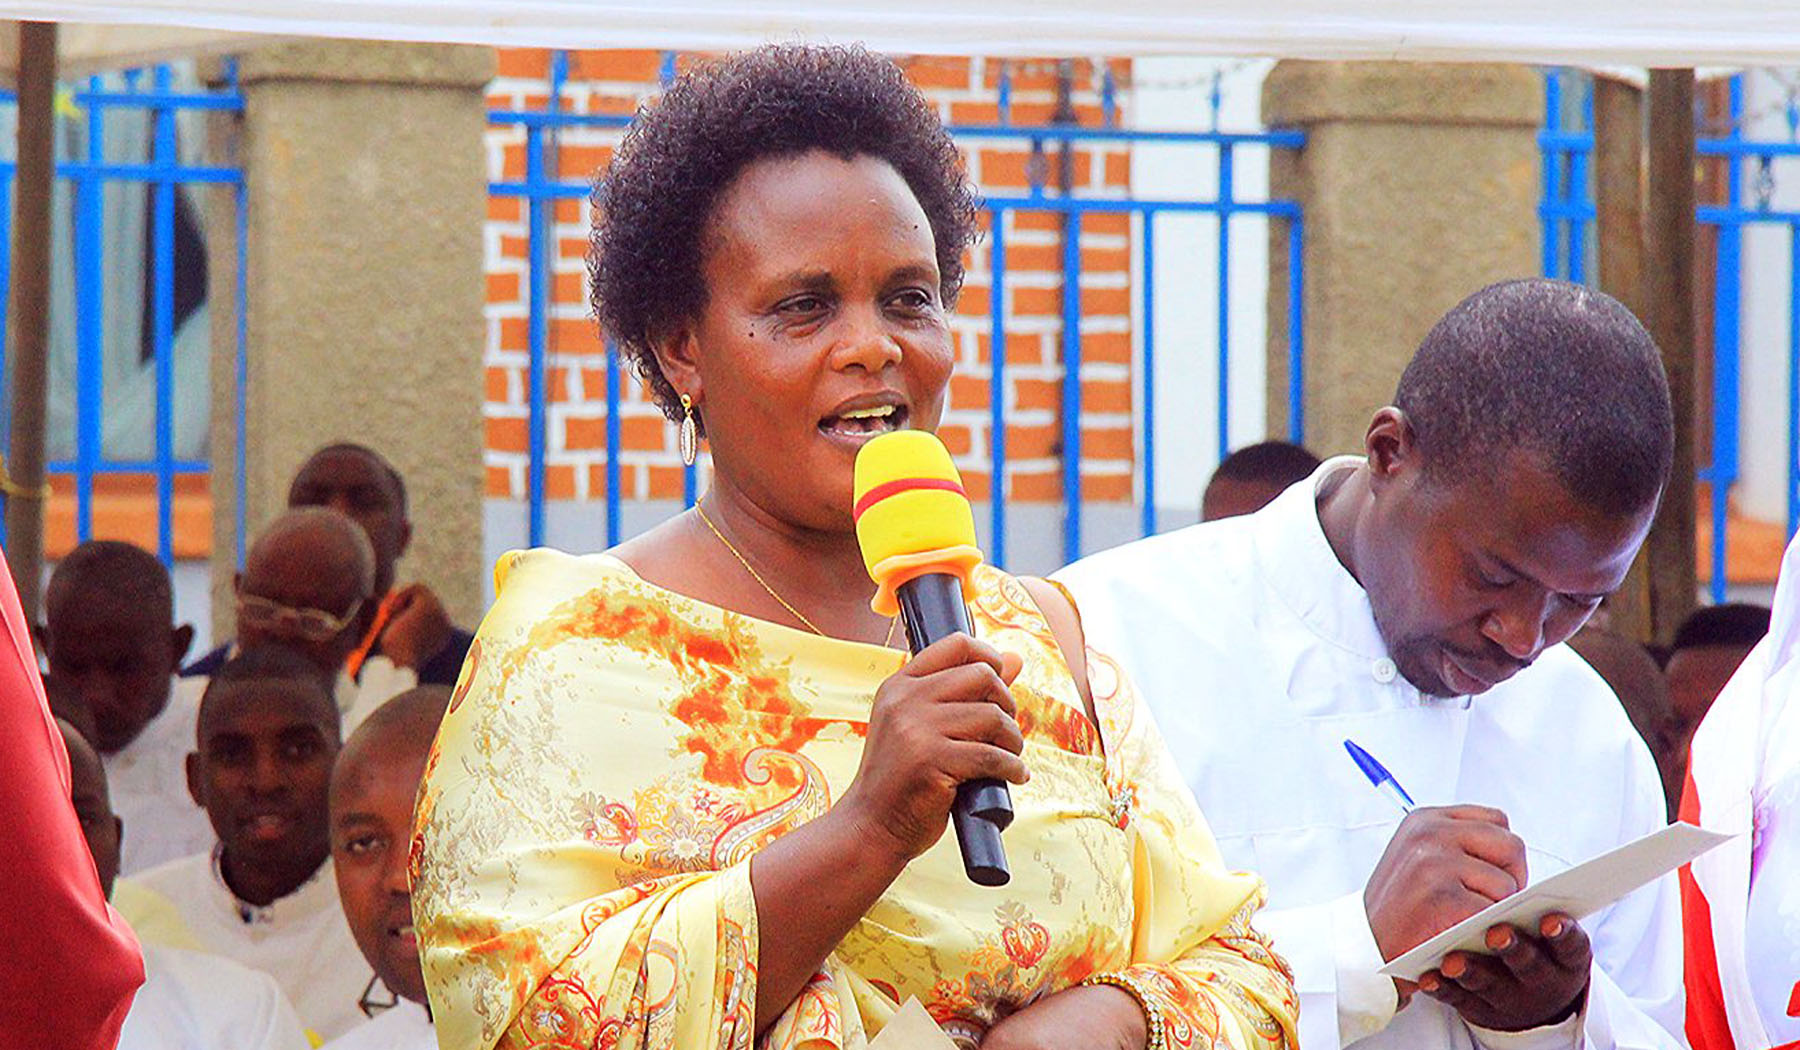 Hon. Enid Origumisiriza calls upon the government to divert its effort and support a boy child.